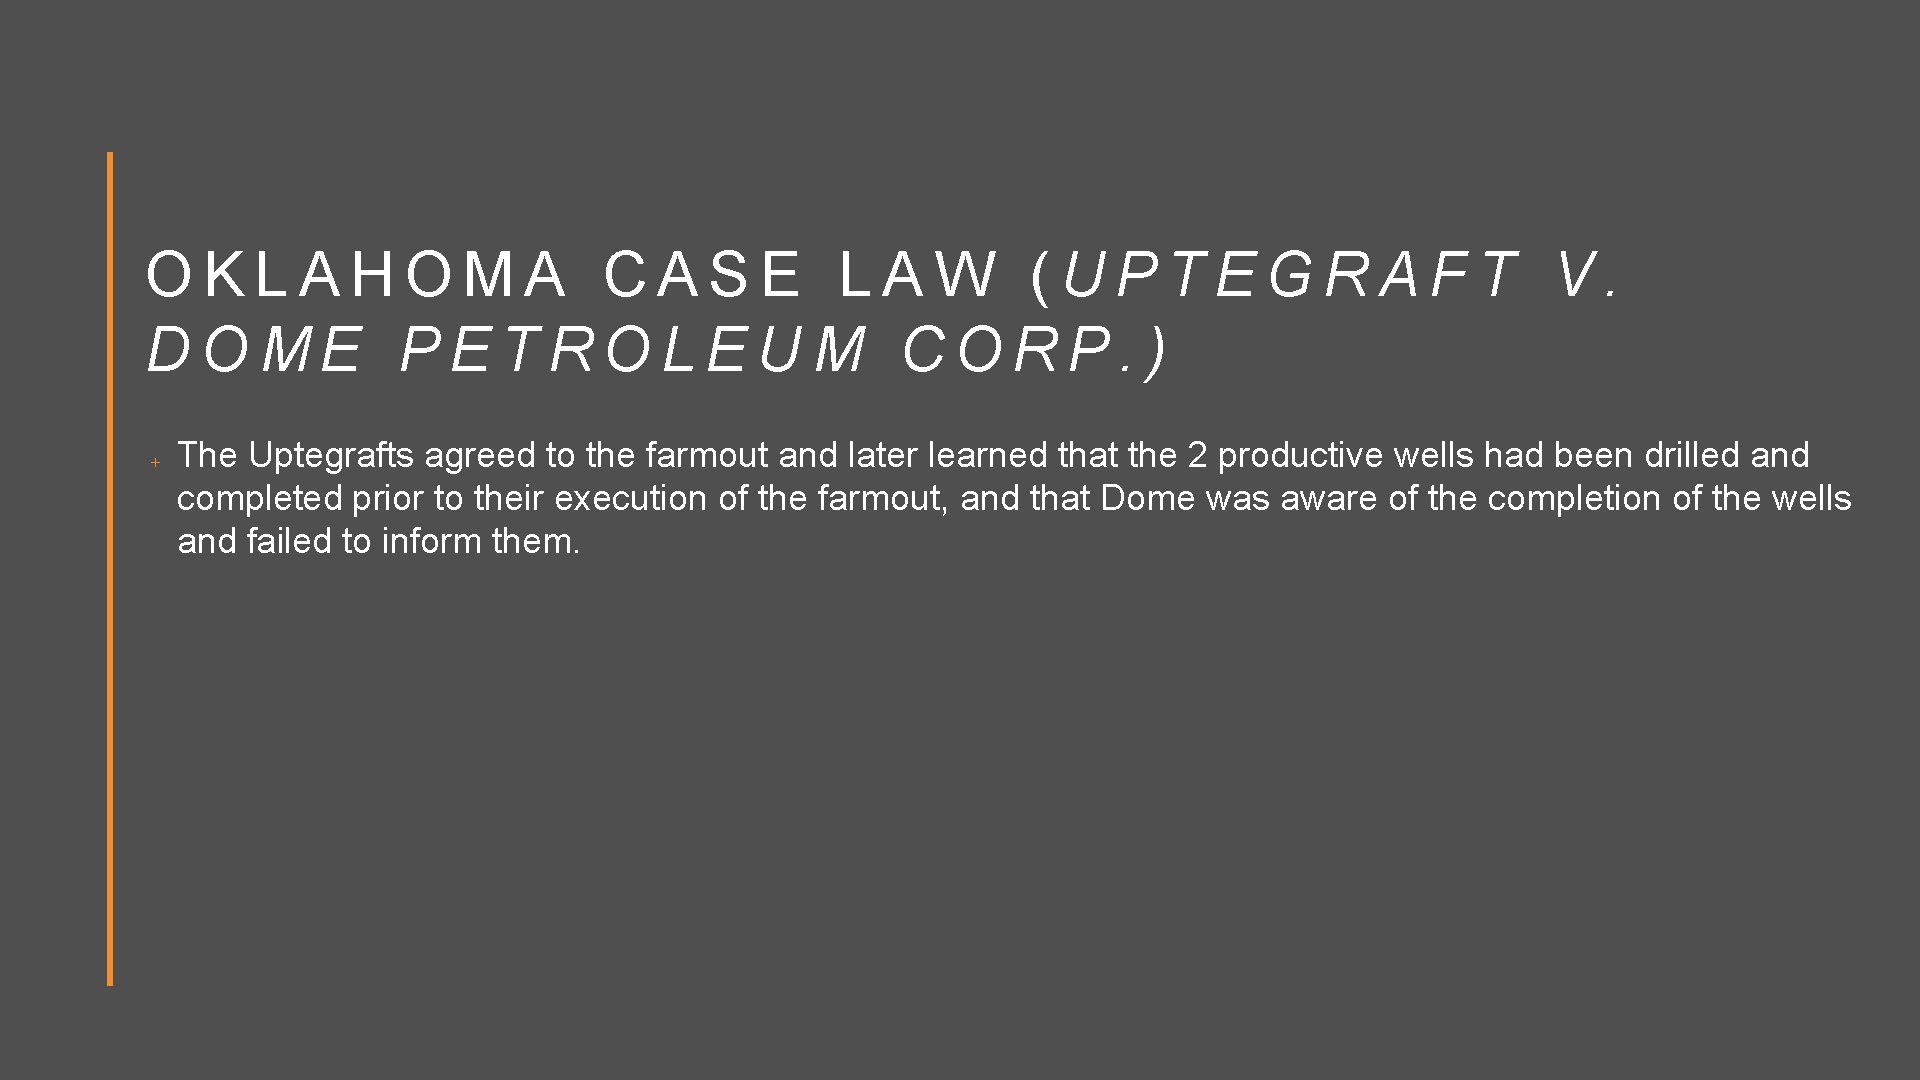 OKLAHOMA CASE LAW (UPTEGRAFT V. DOME PETROLEUM CORP. ) The Uptegrafts agreed to the